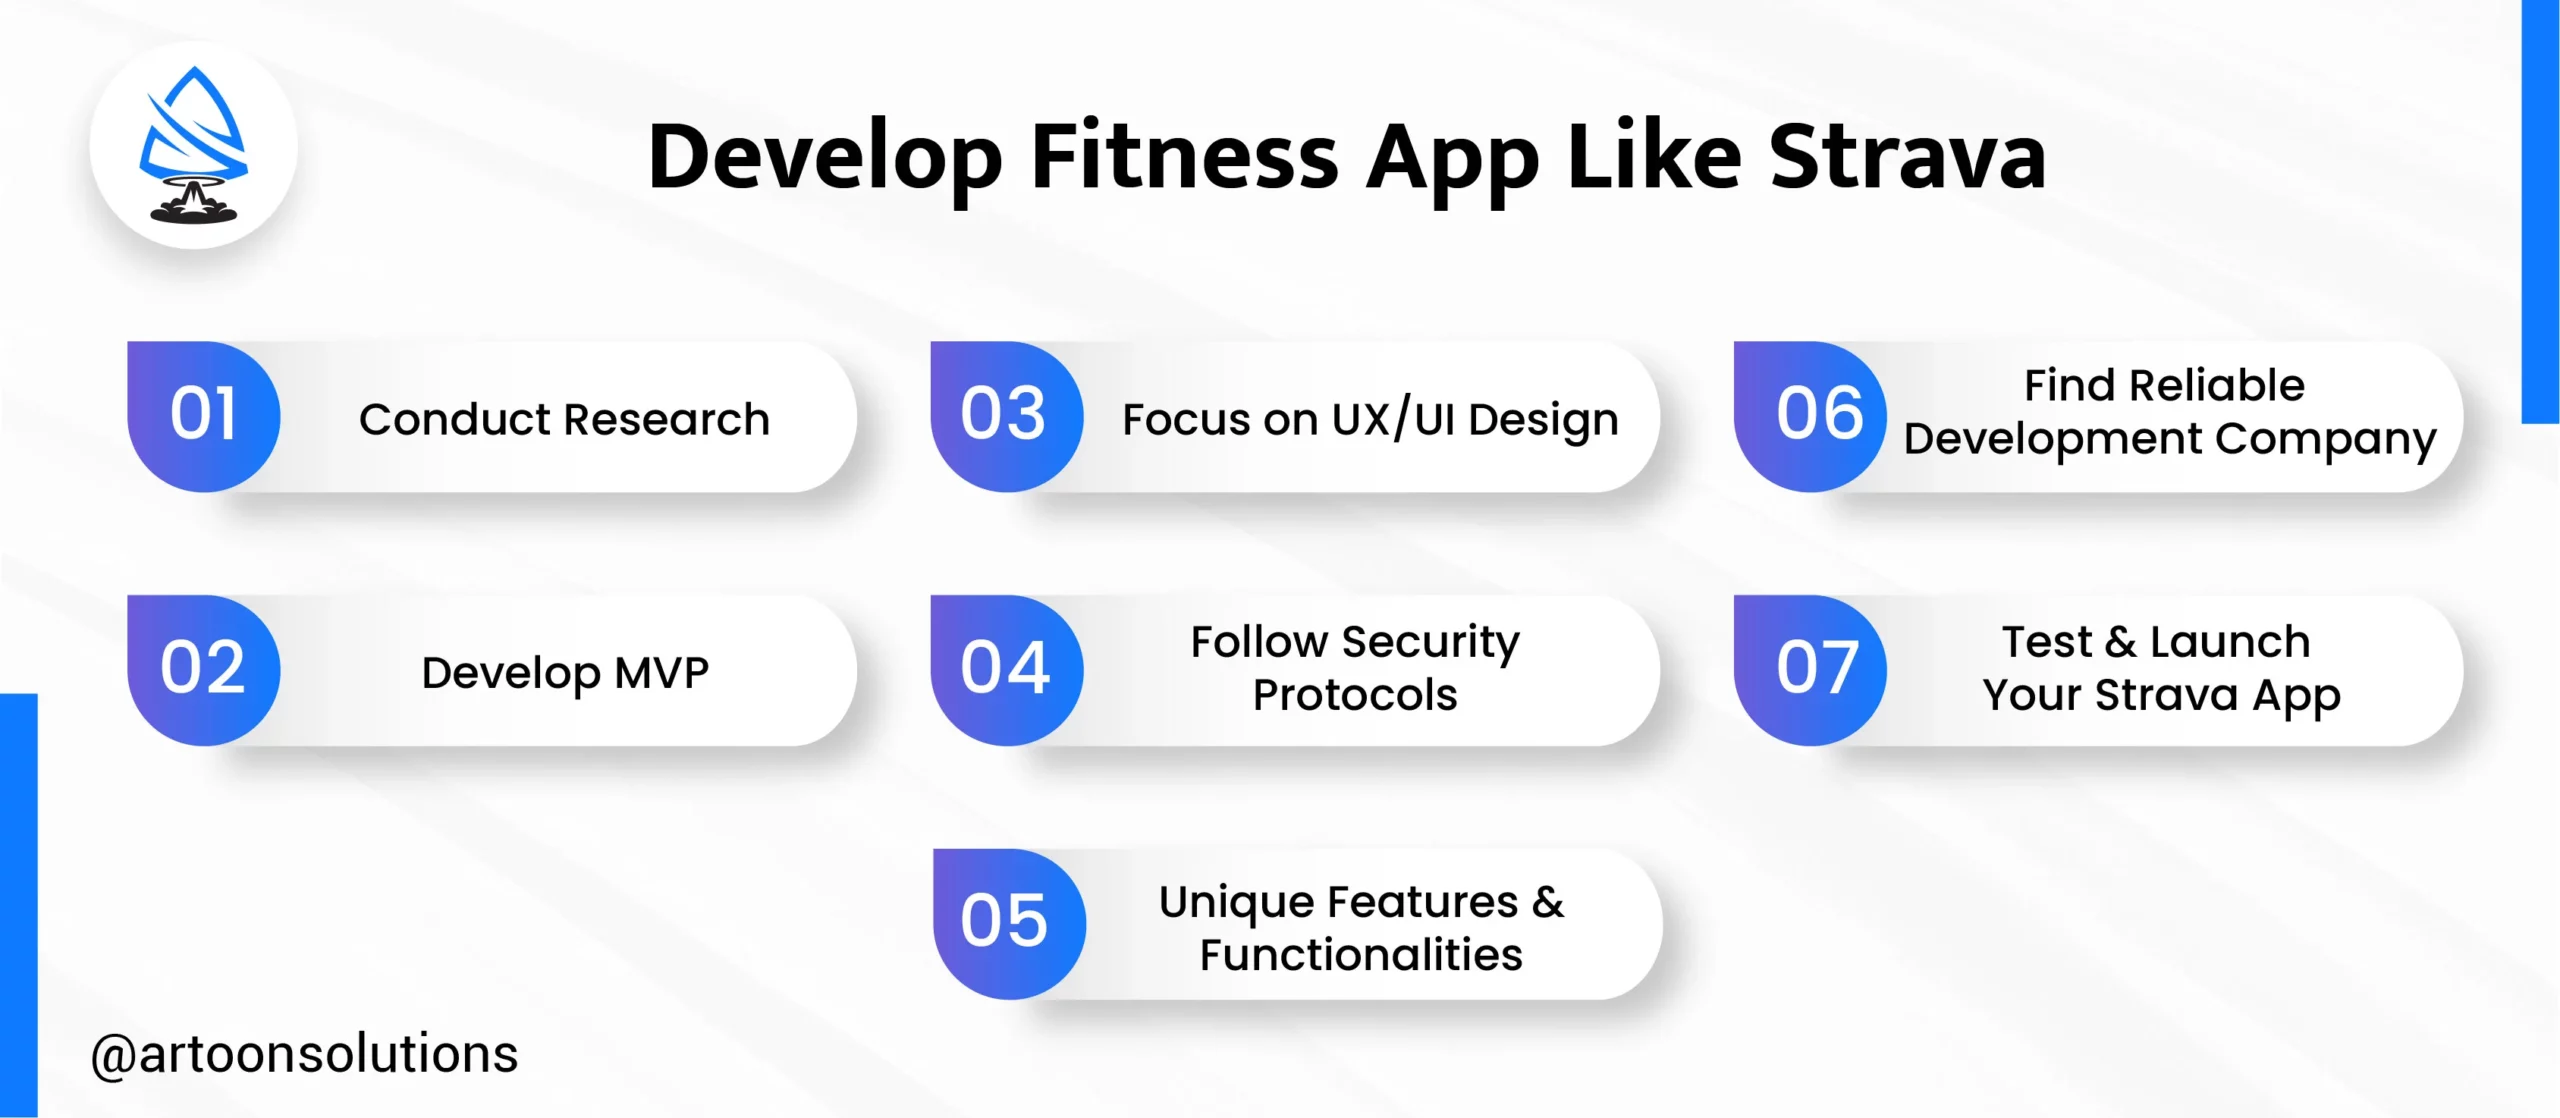 How to Develop a Fitness App Like Strava?